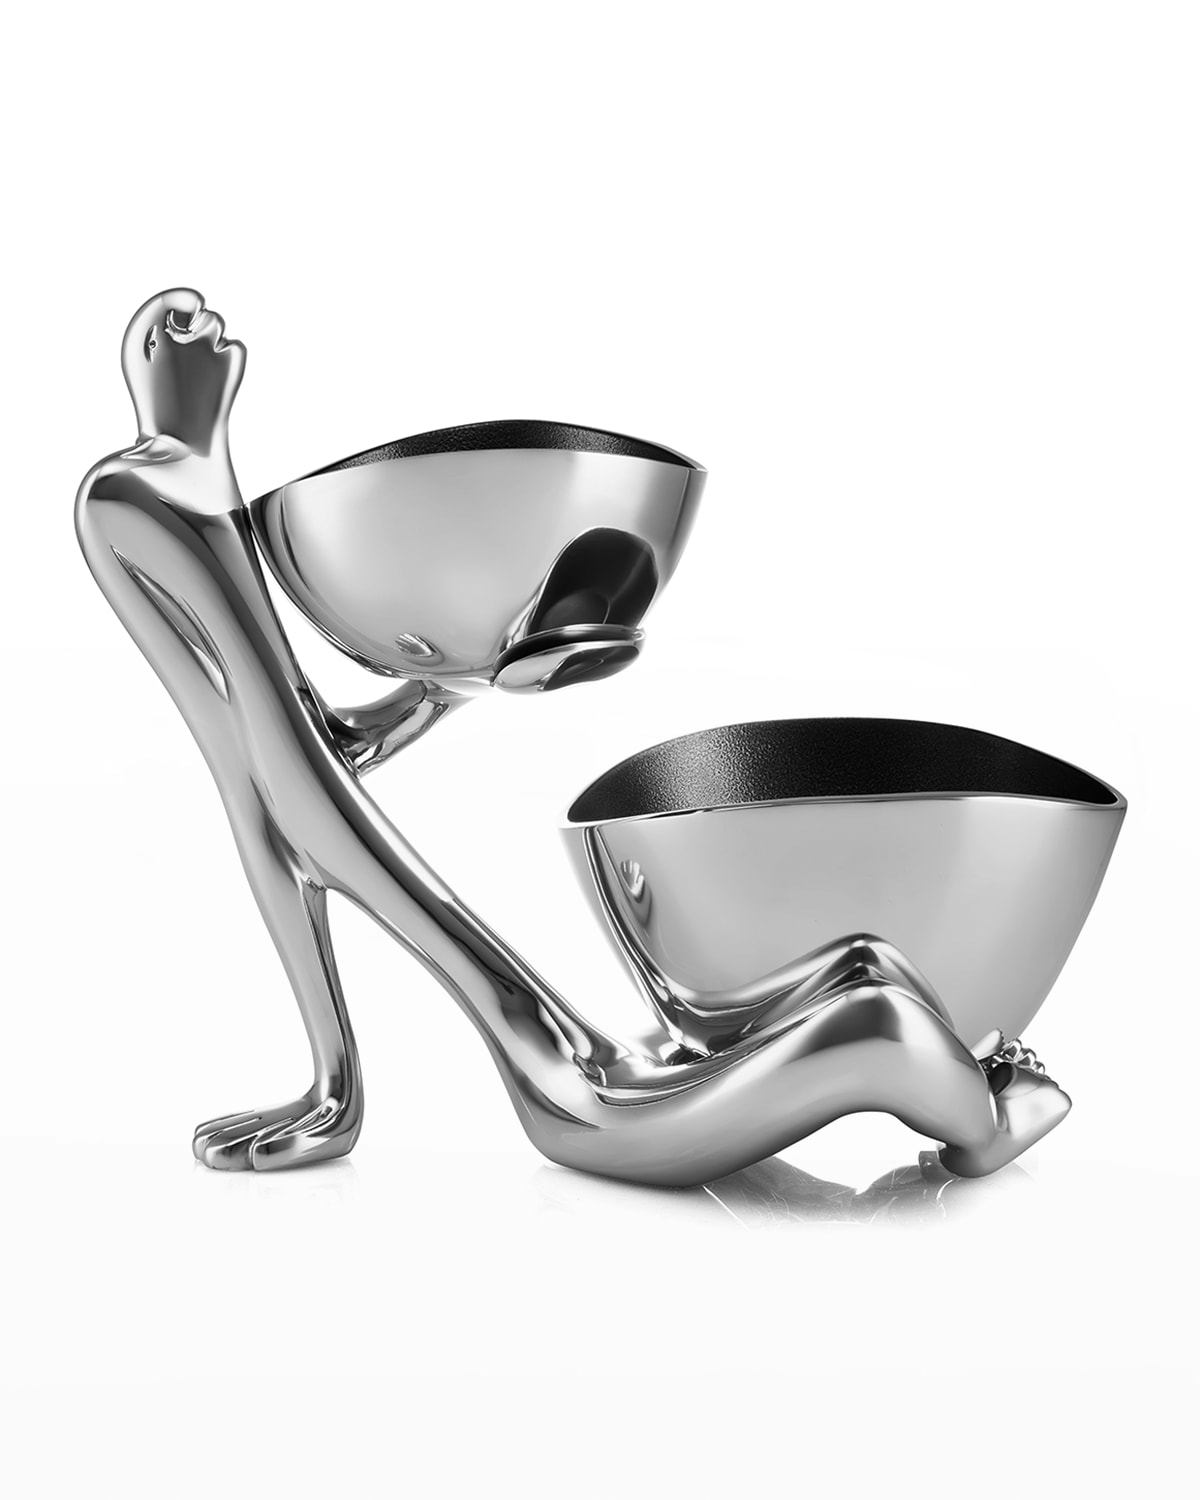 Carrol Boyes Laid Back Chip And Dip Server